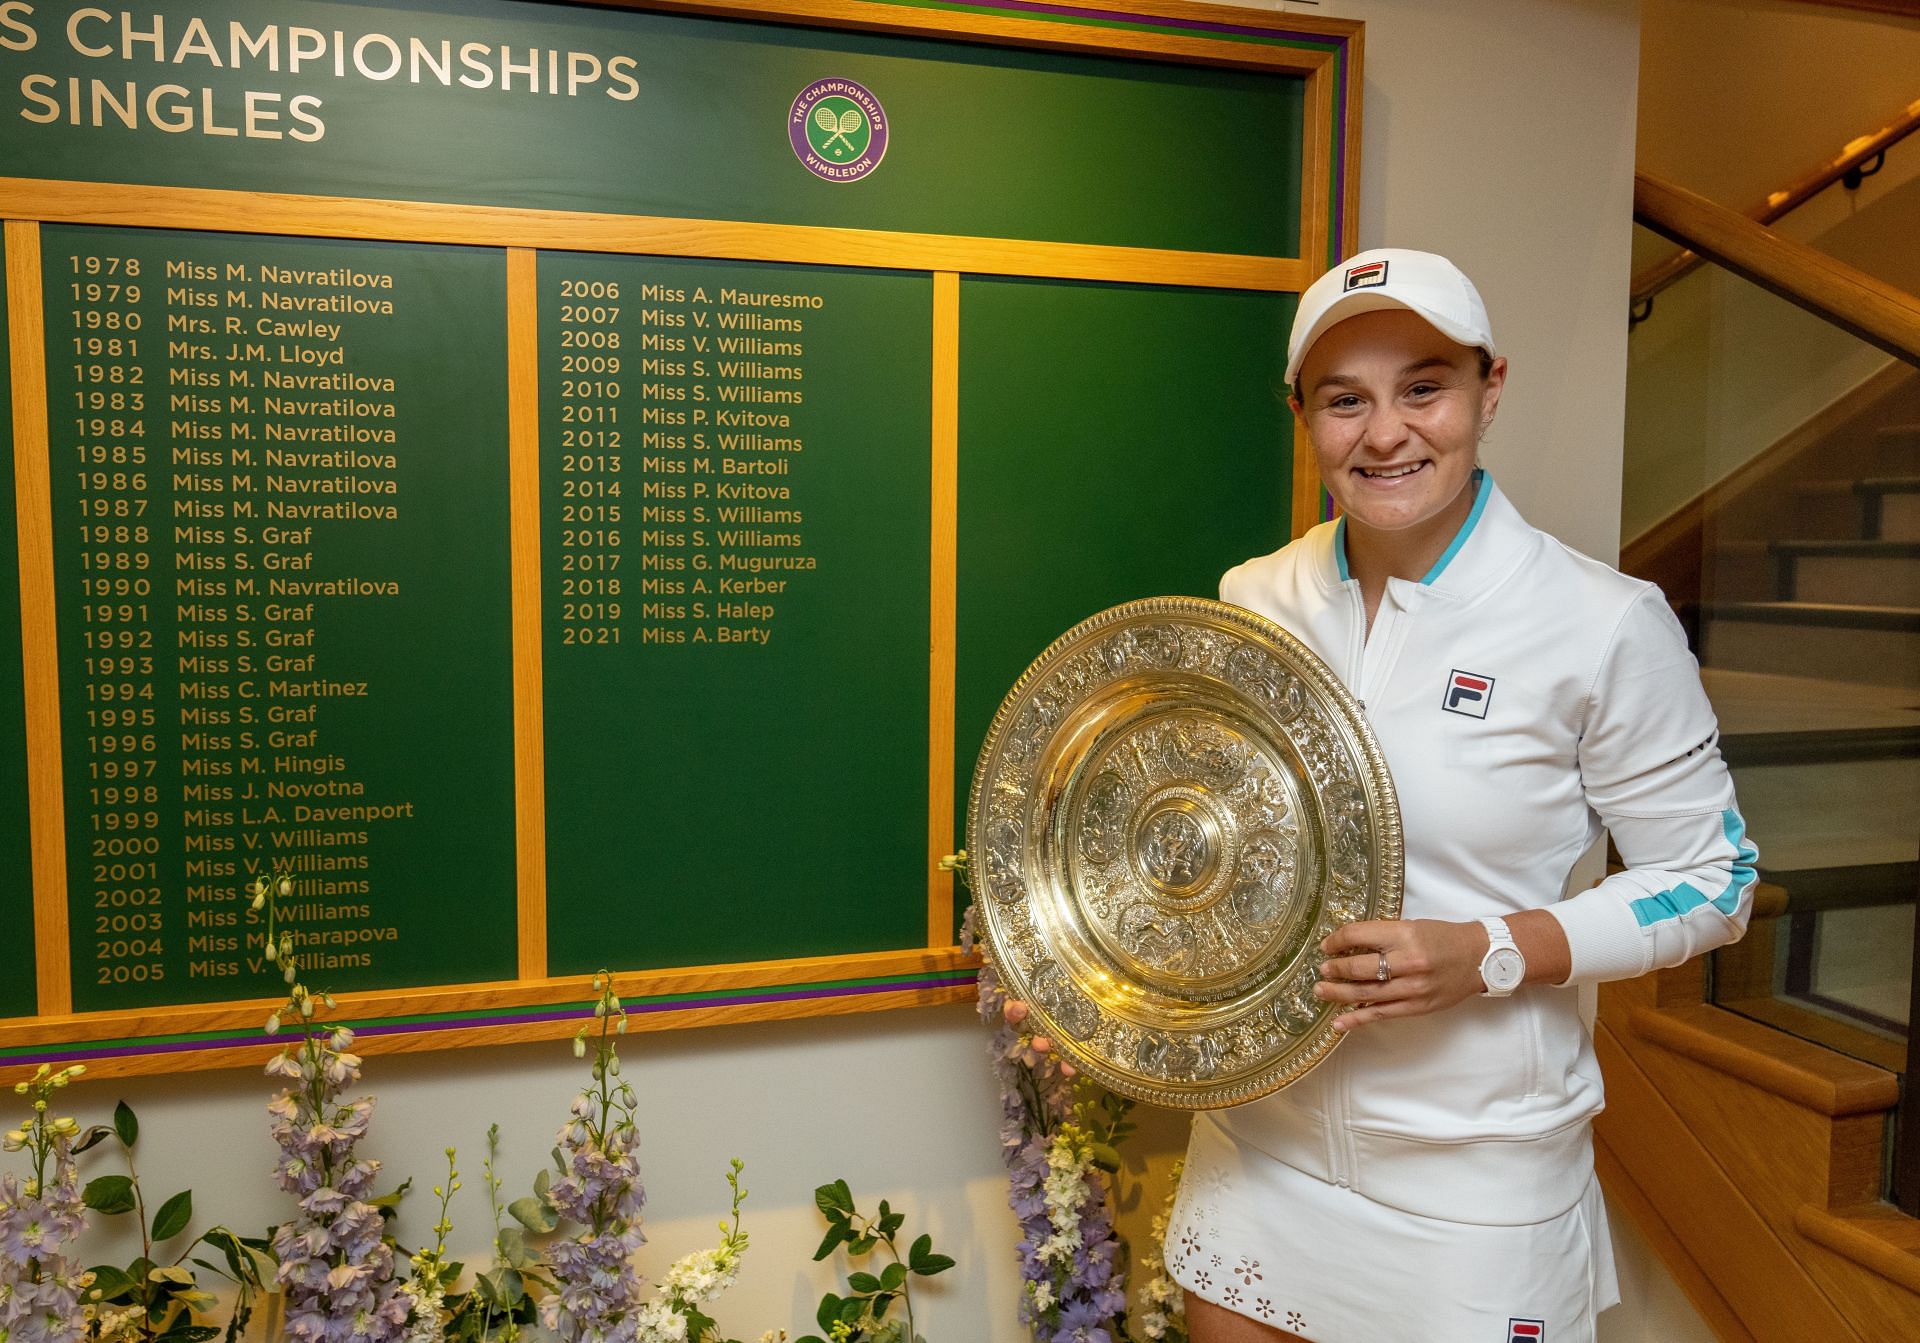 Ashleigh Barty won her second Major title at Wimbledon 2021